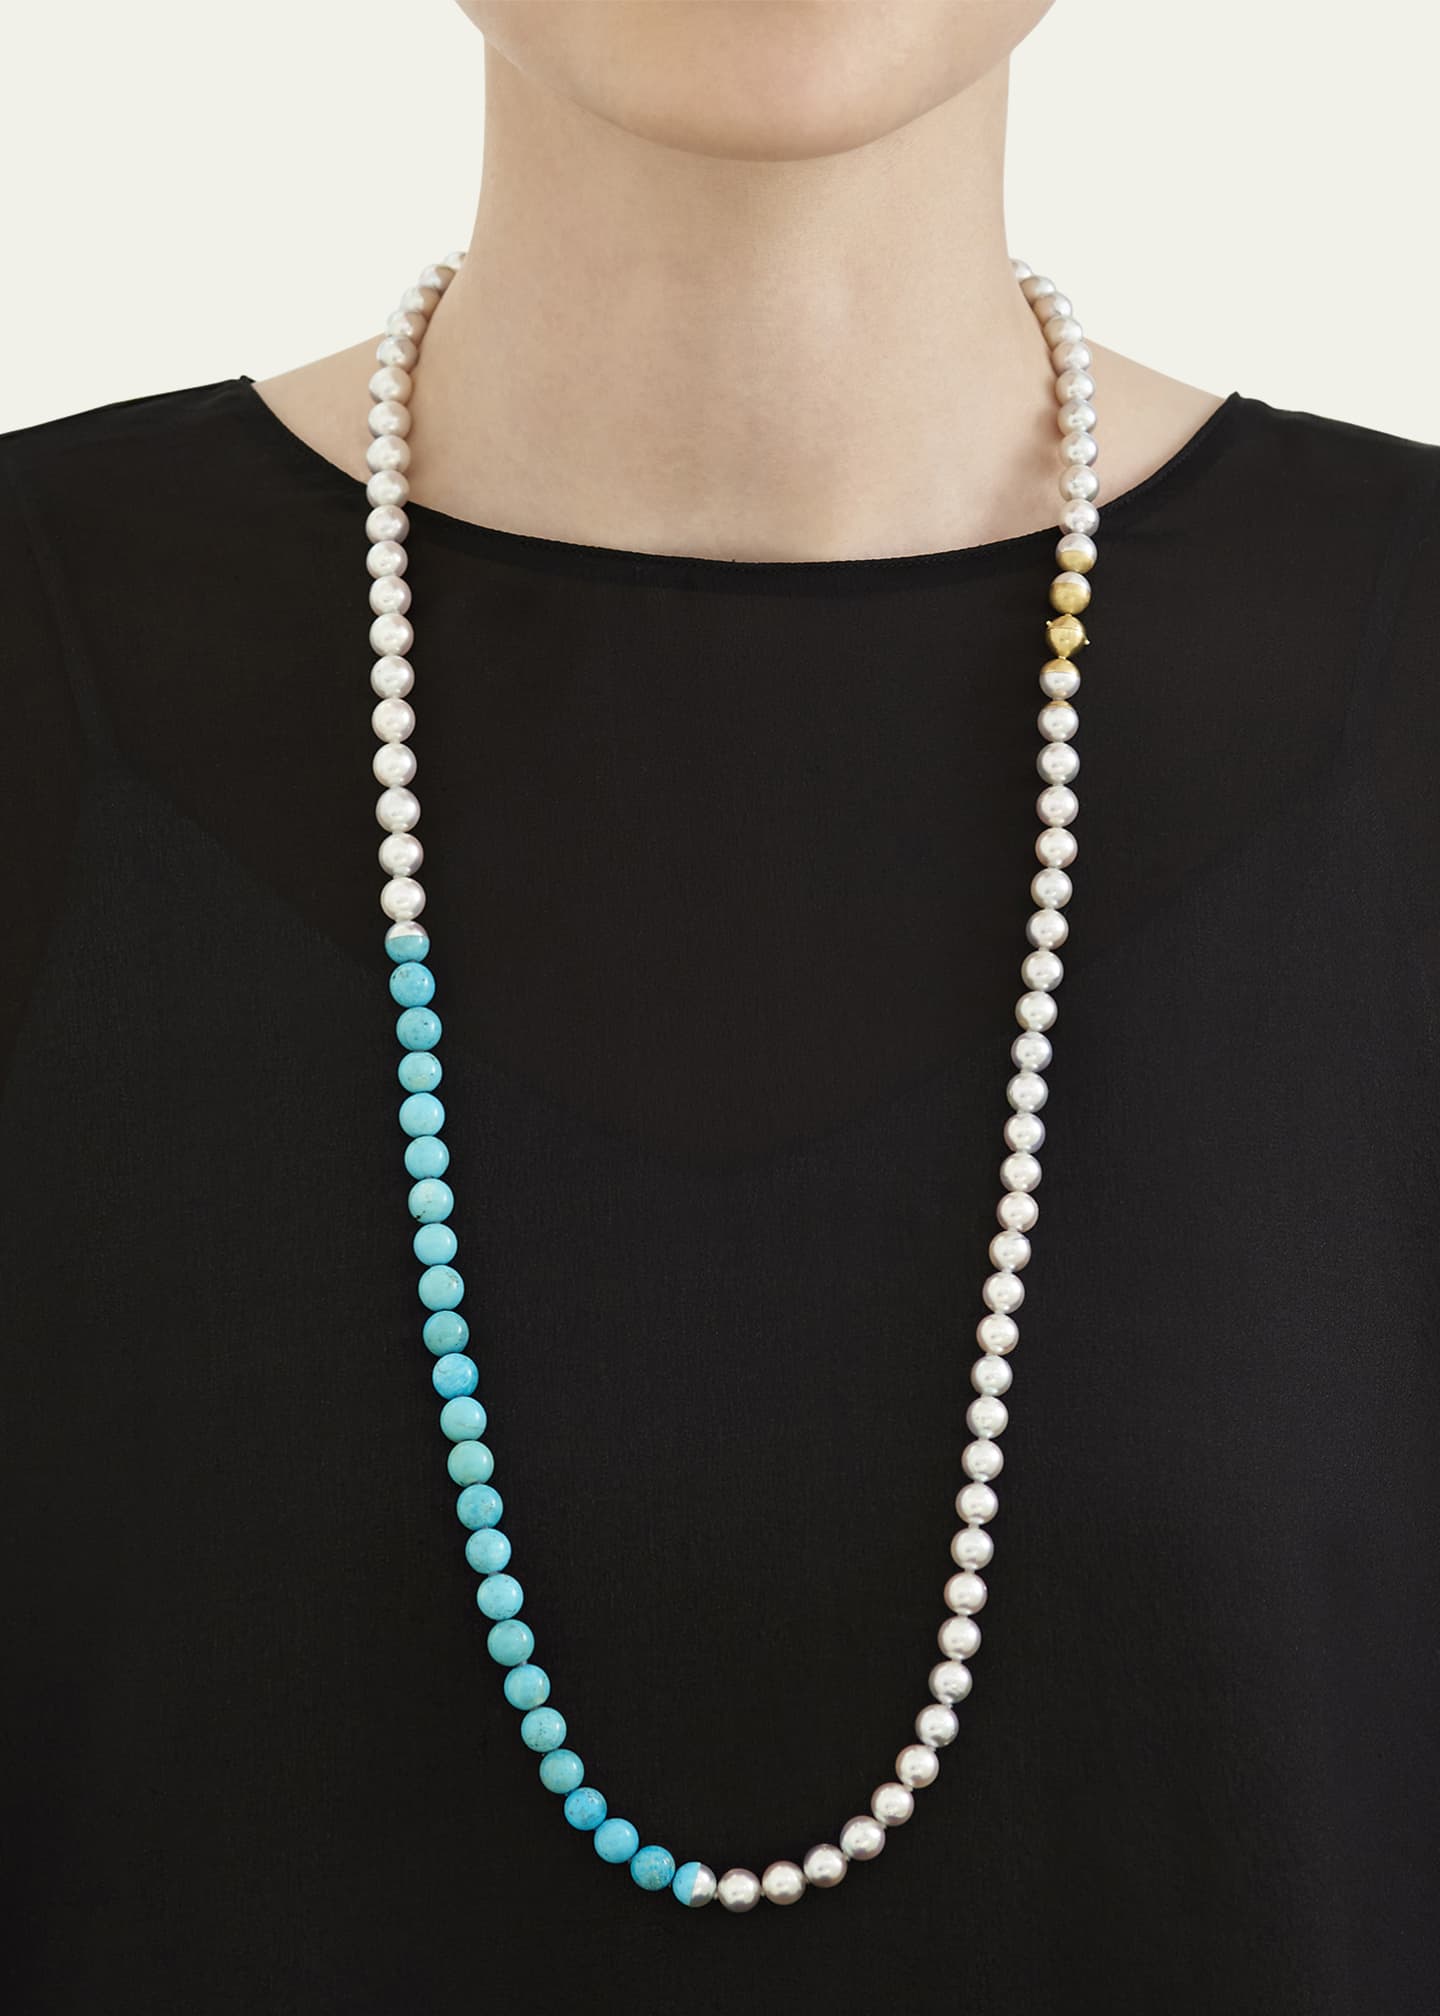 YUTAI Long Sectional Pearl Necklace with Turquoise - Bergdorf Goodman